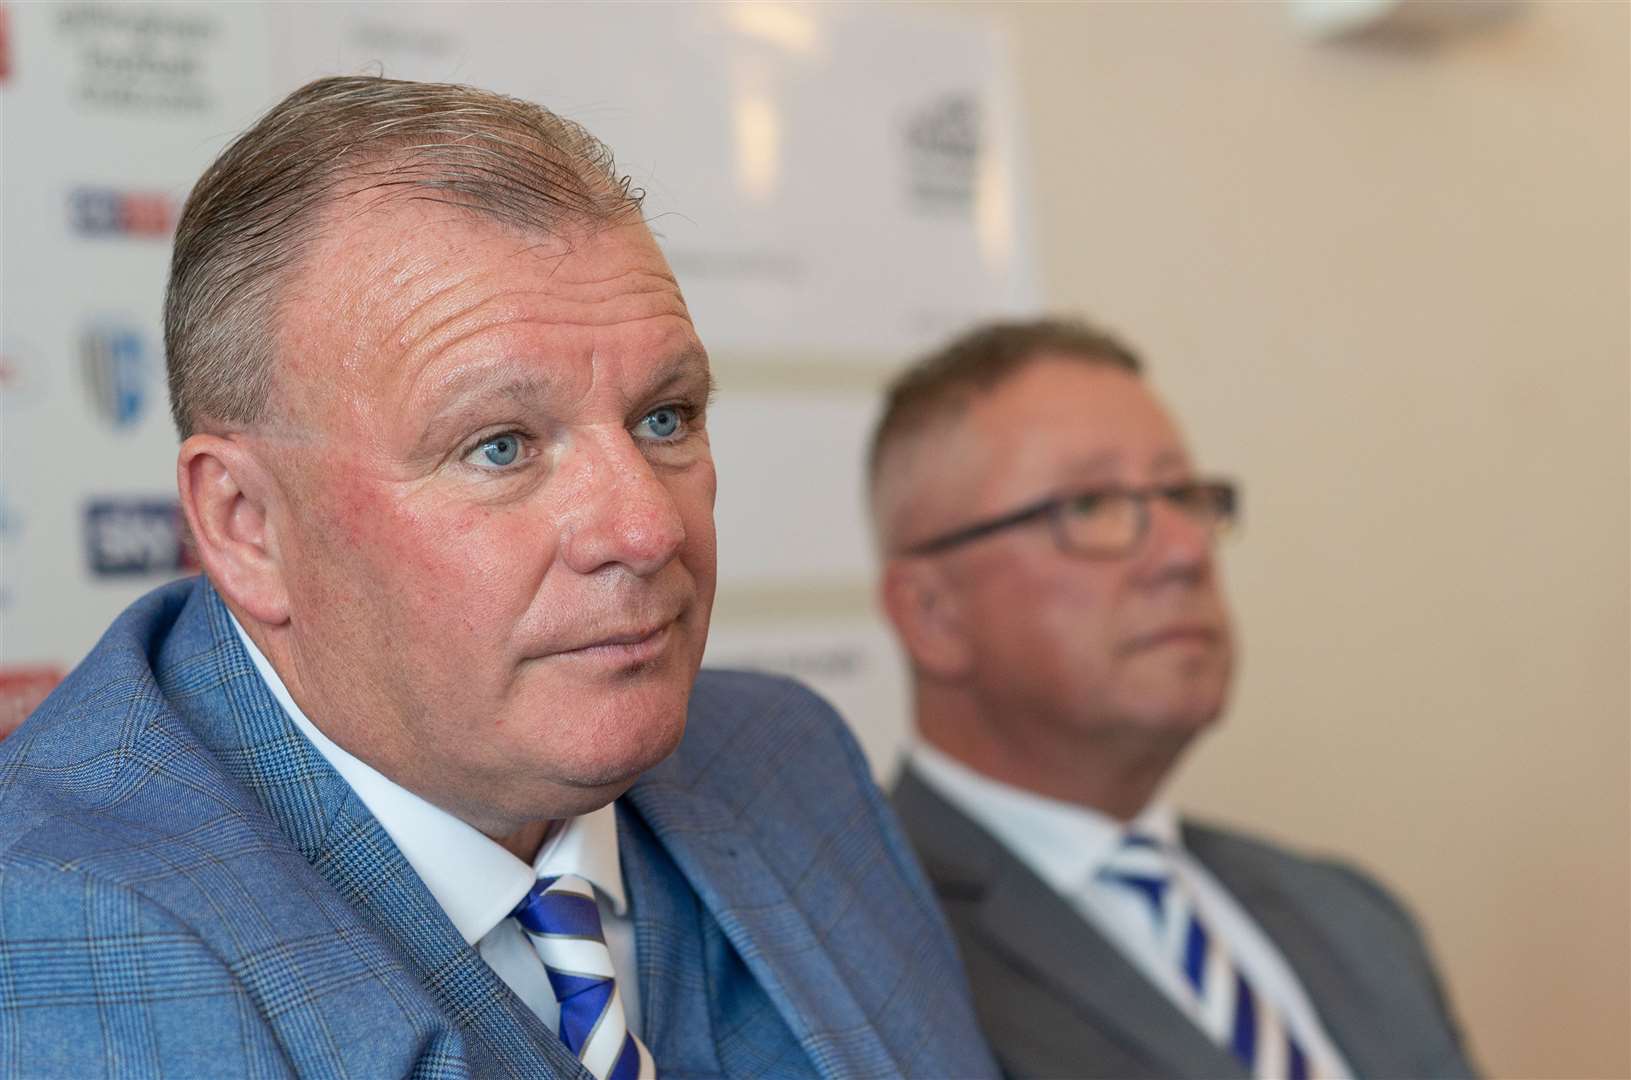 Gillingham manager Steve Evans was unable to complete his first season in charge of the club